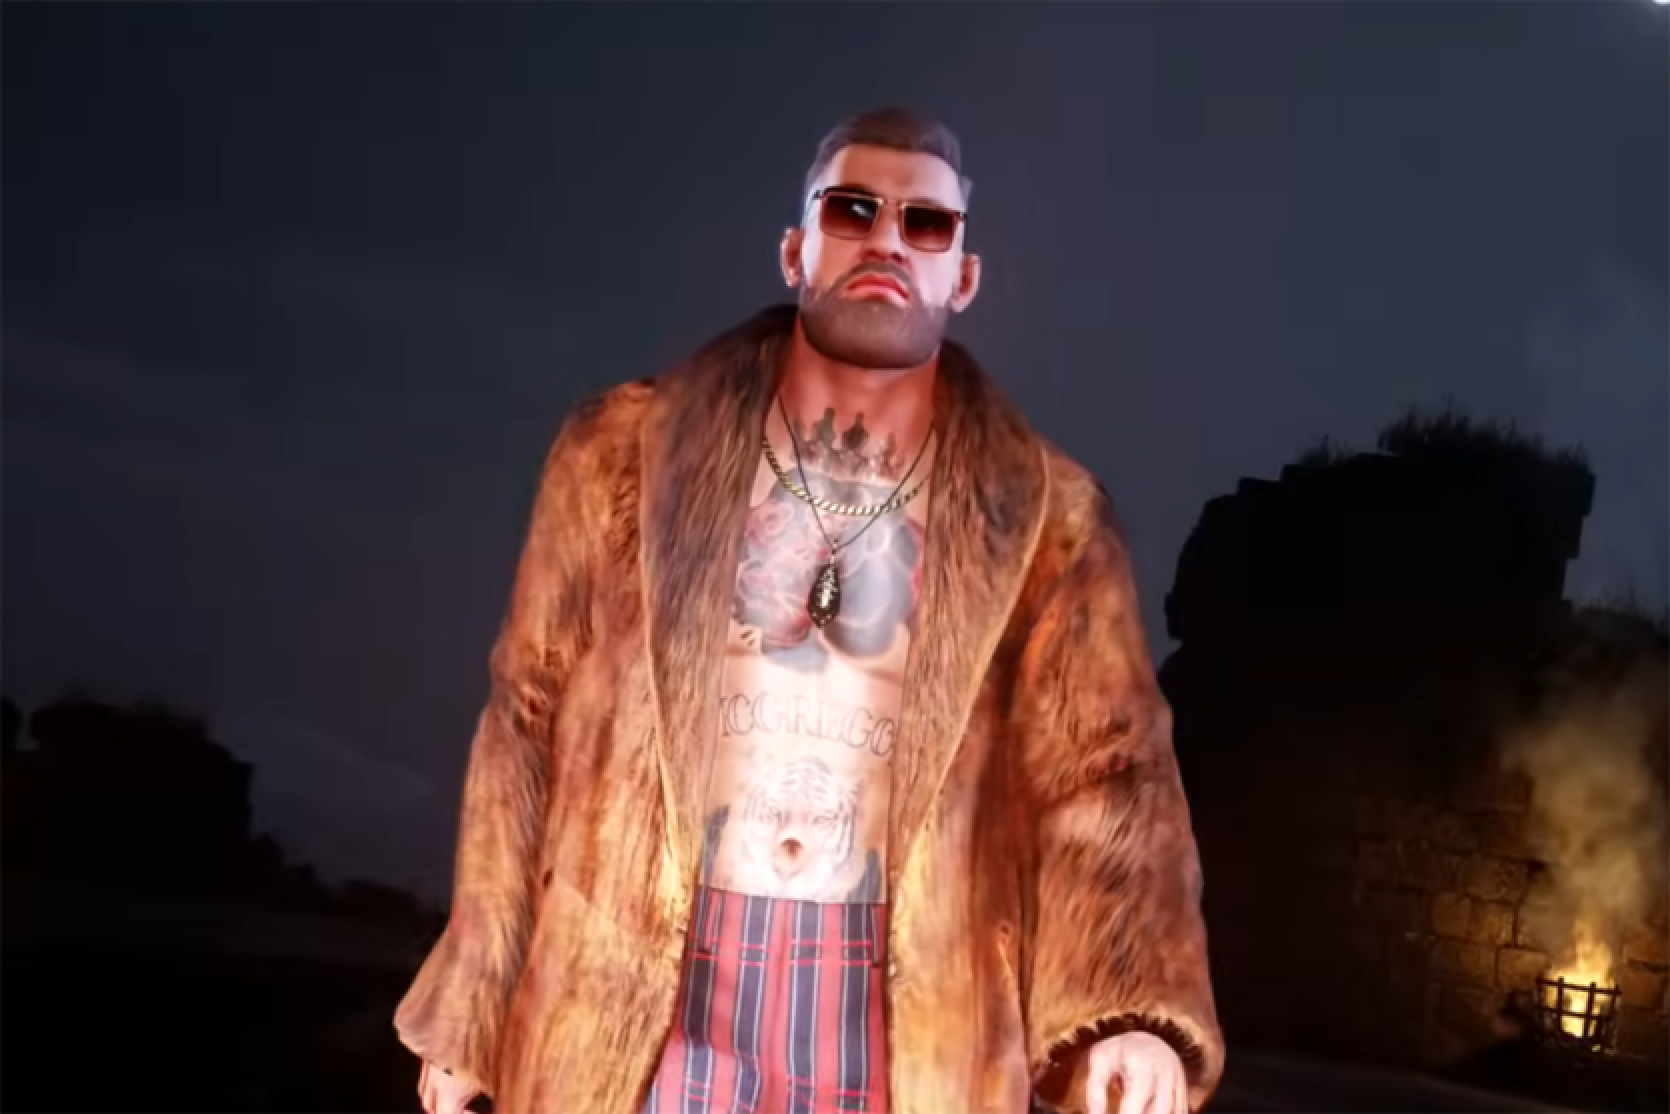 In the Disruptor DLC for Hitman, players will be hunting MMA fighter Conor McGregor